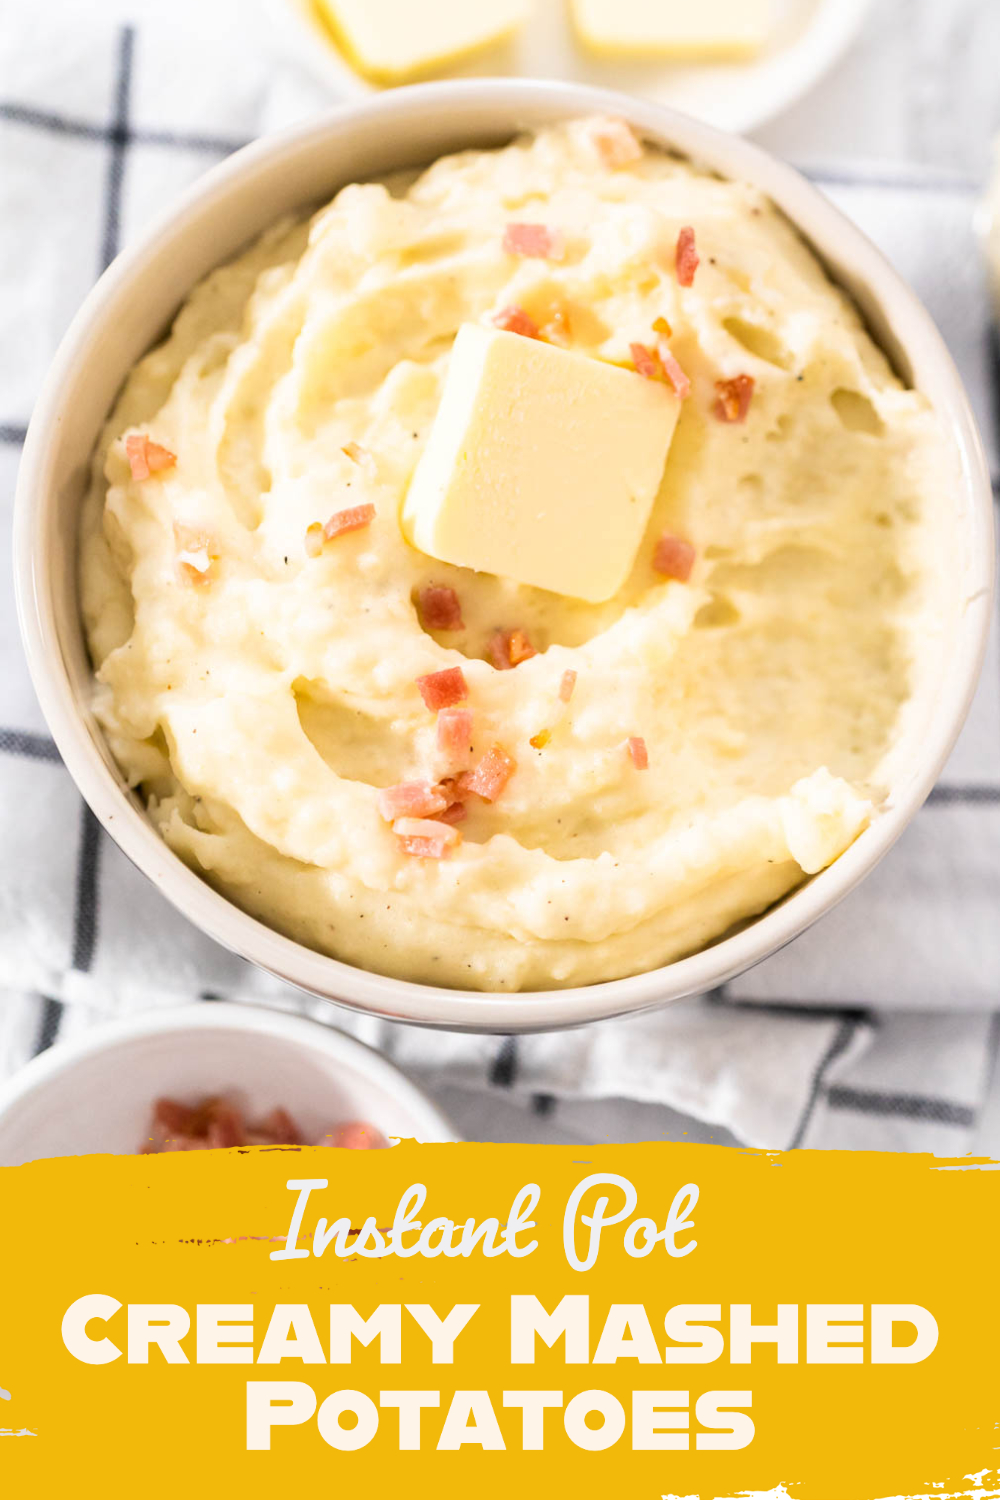 Instant Pot Creamy Mashed Potatoes